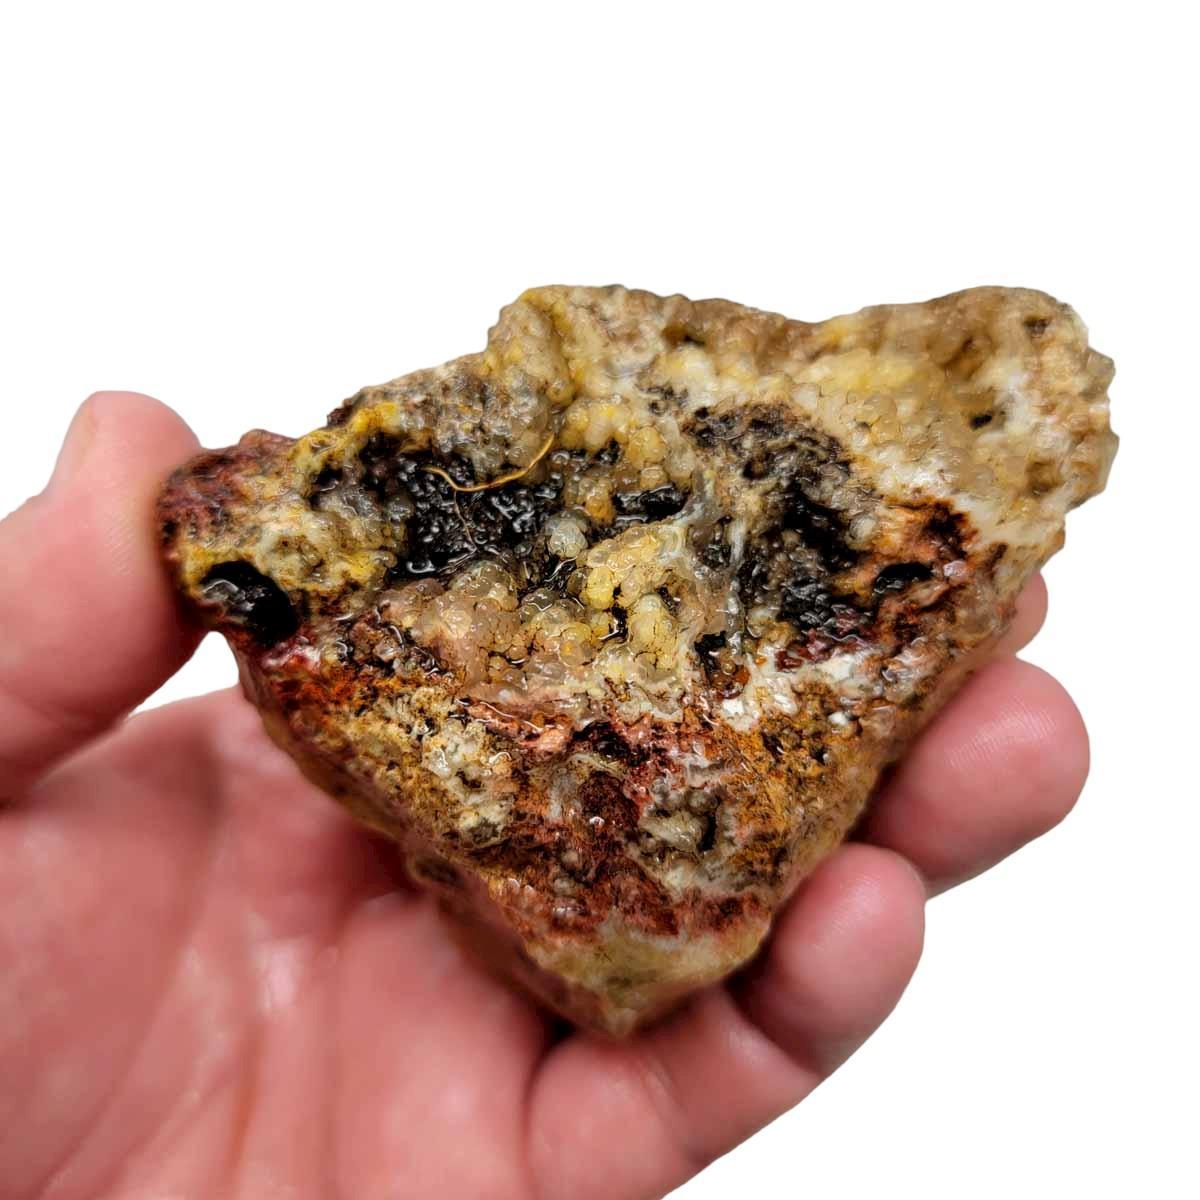 Graveyard Point Plume Agate Rough Chunk! - LapidaryCentral